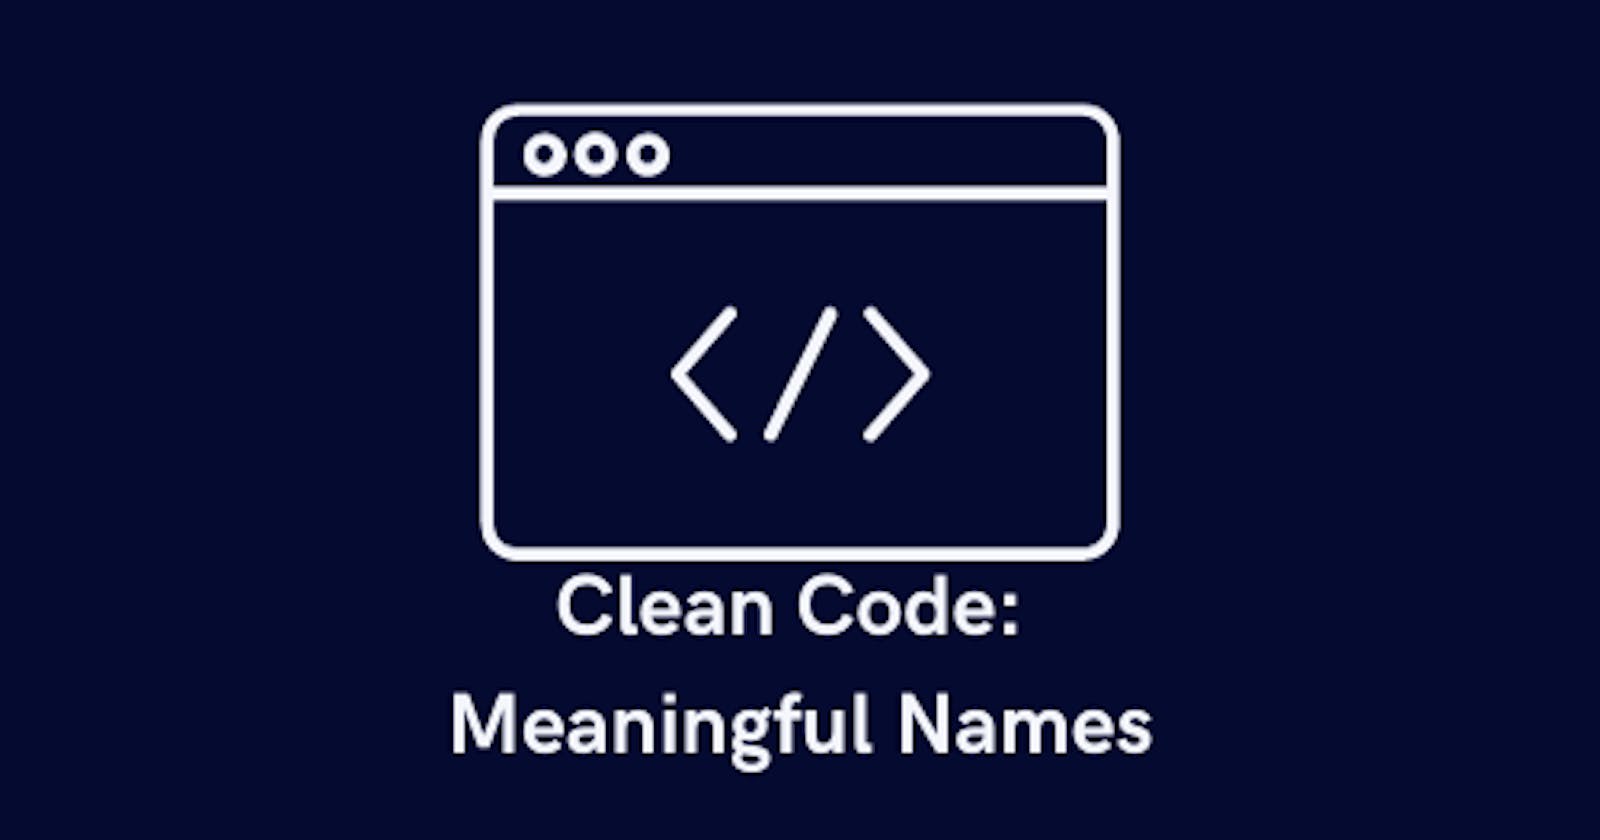 Clean Code: Meaningful Names